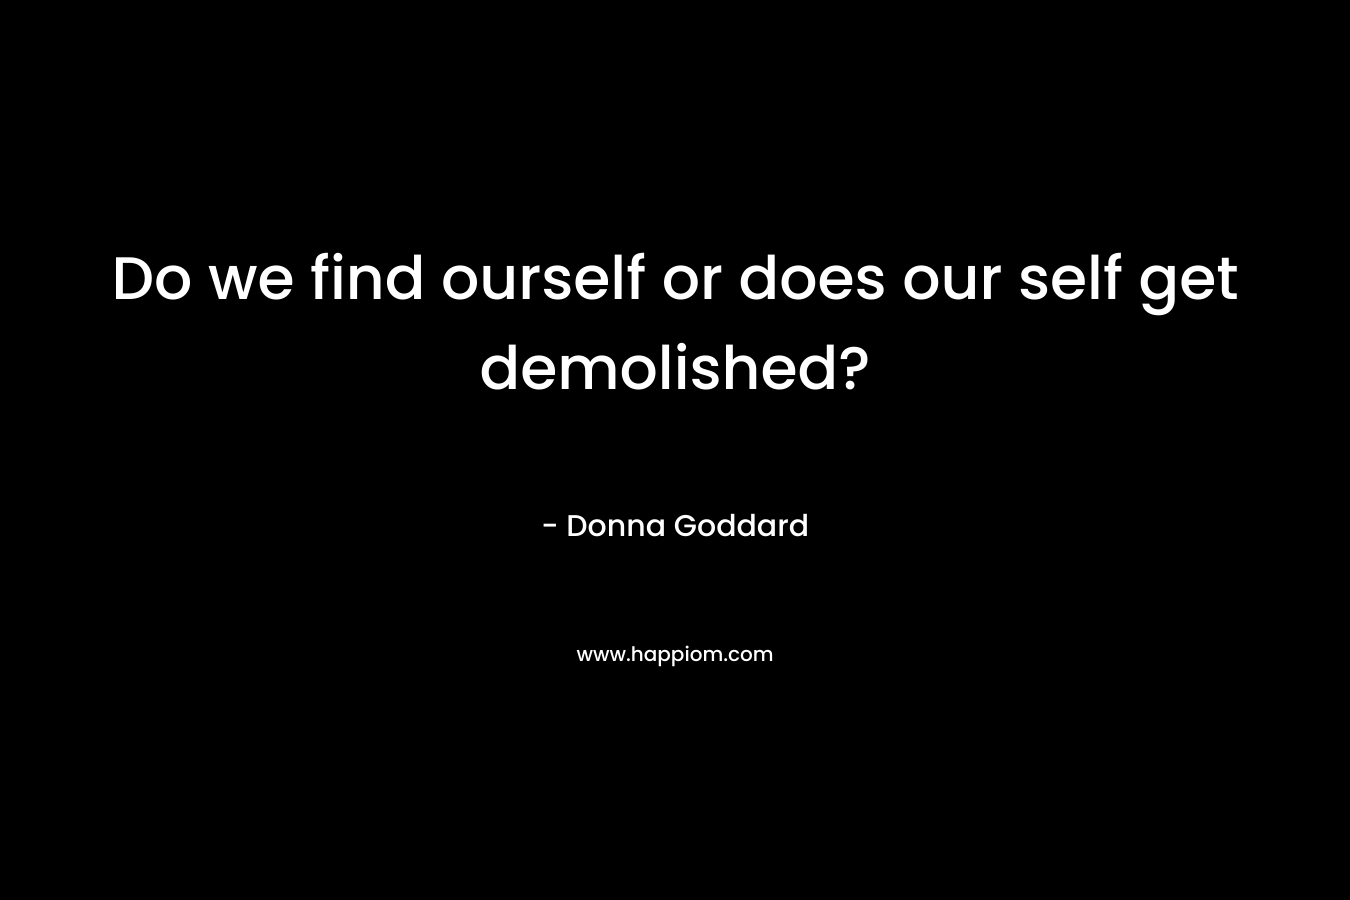 Do we find ourself or does our self get demolished?